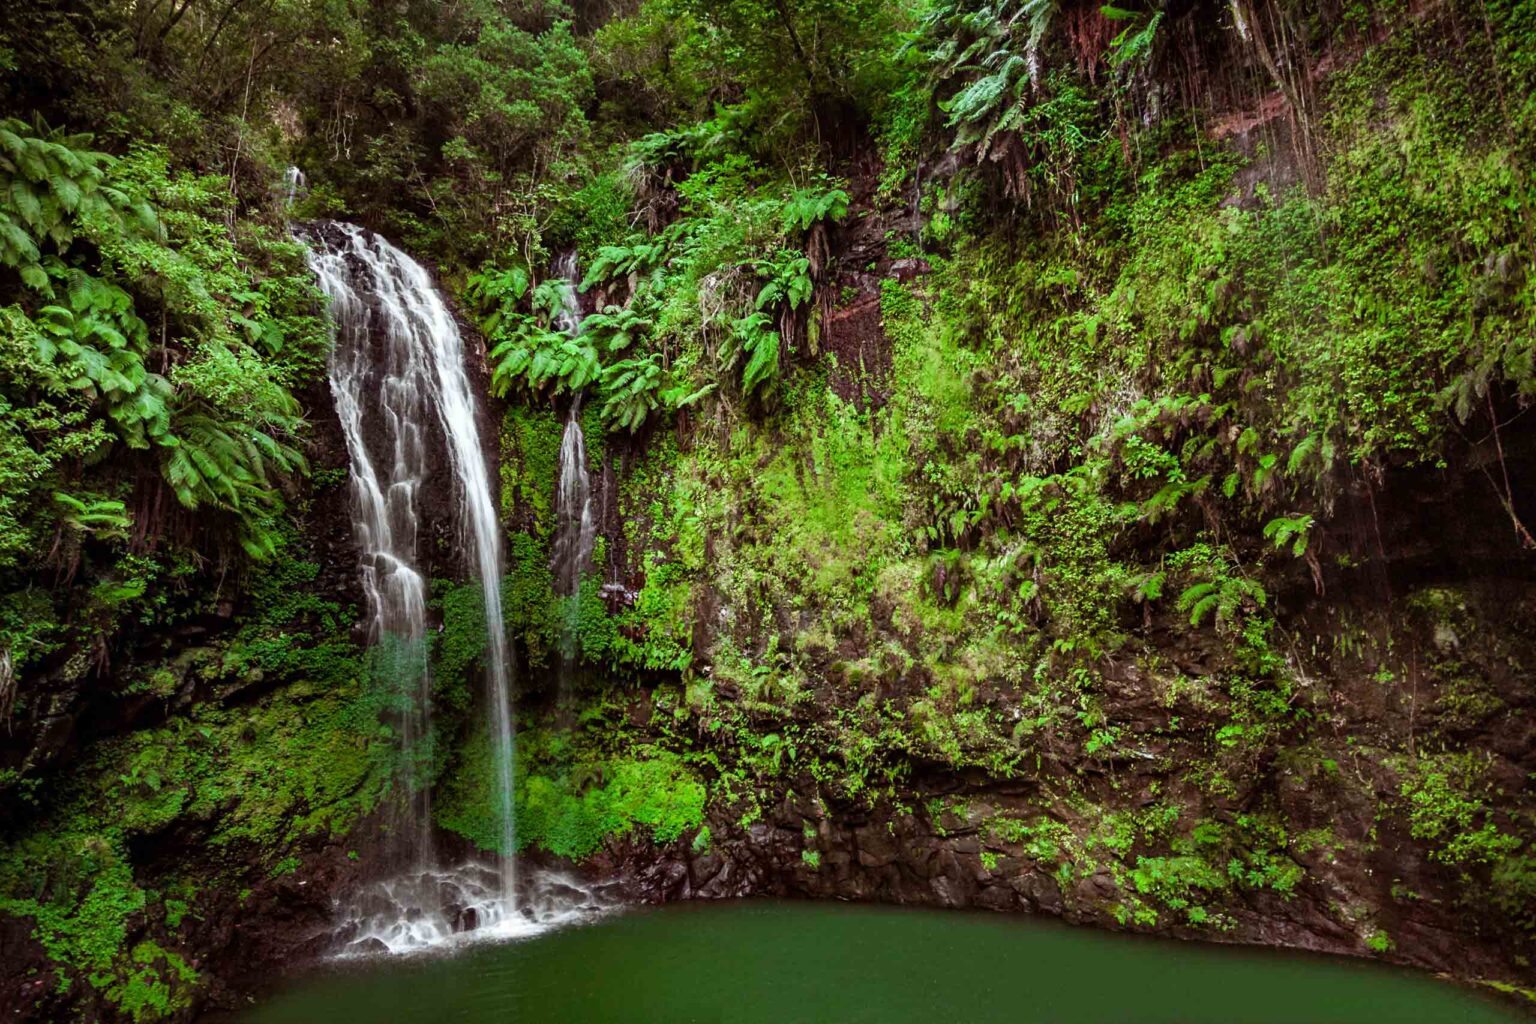 Waterfall and swimming hole surrounded by greenery at Amber Mountain National Park.